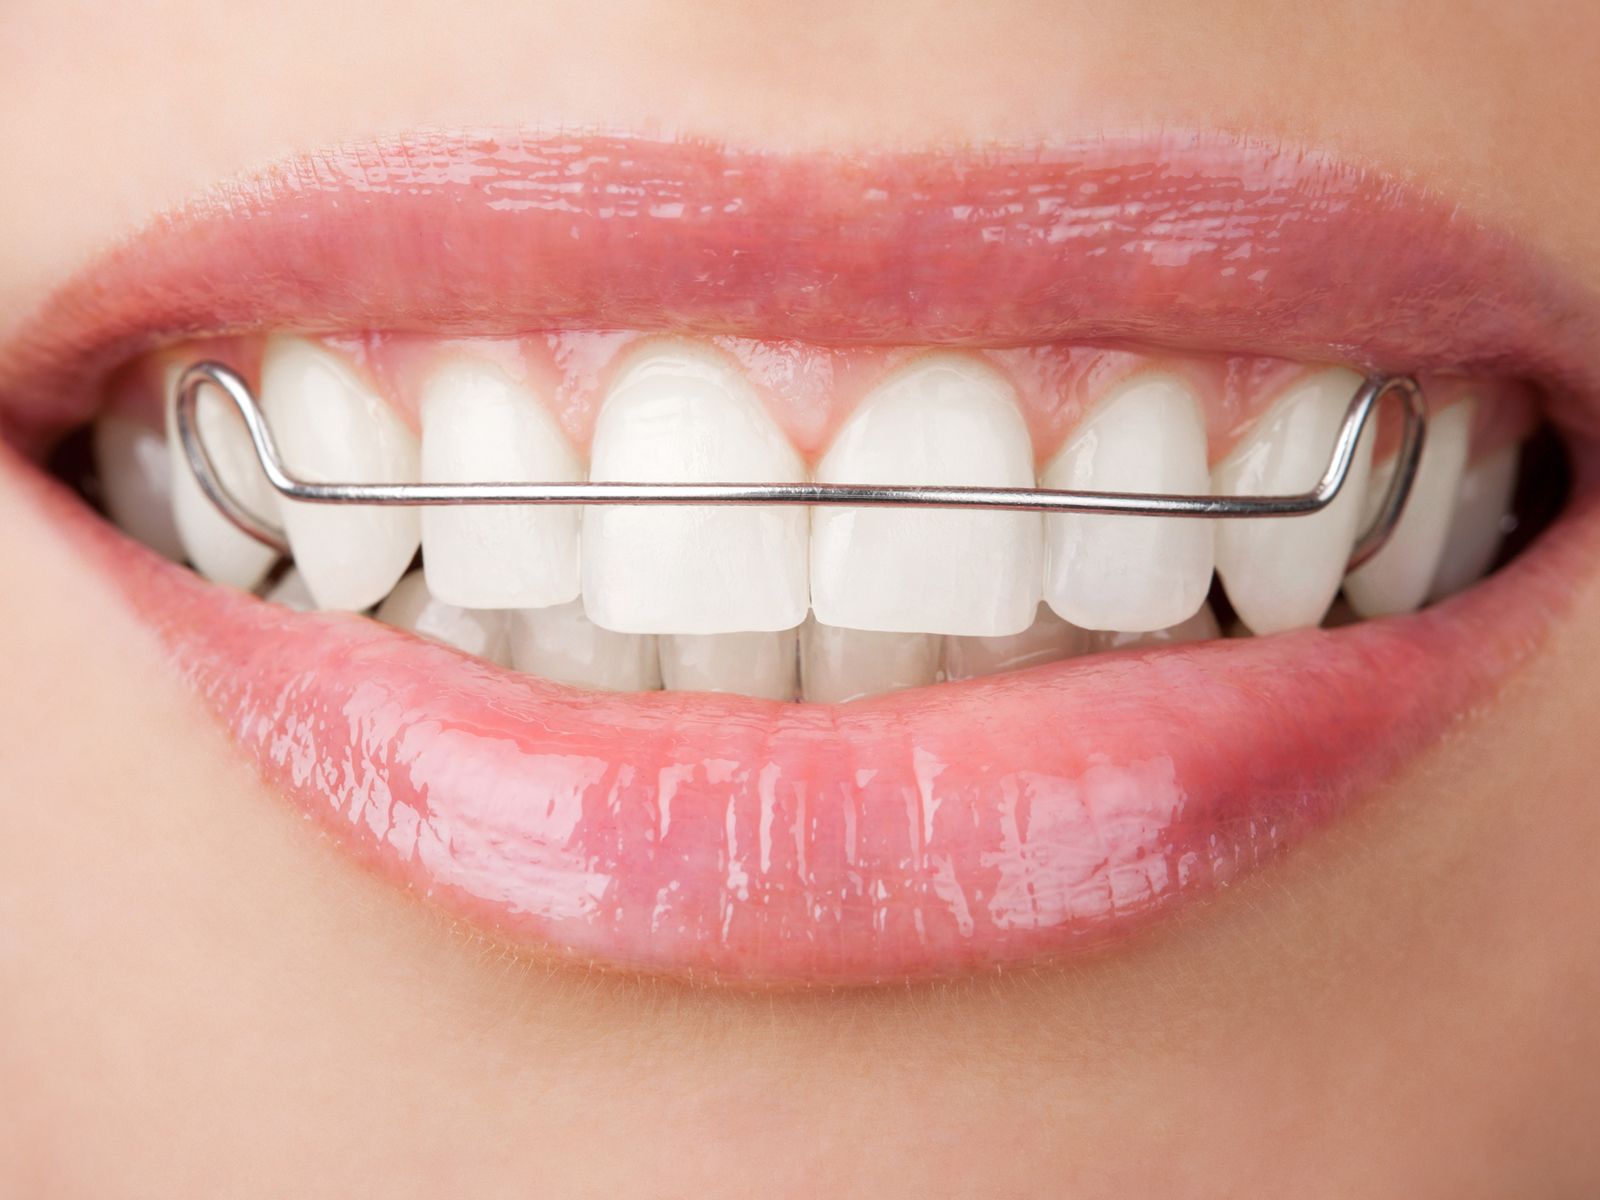 Are plastic or metal retainers better?